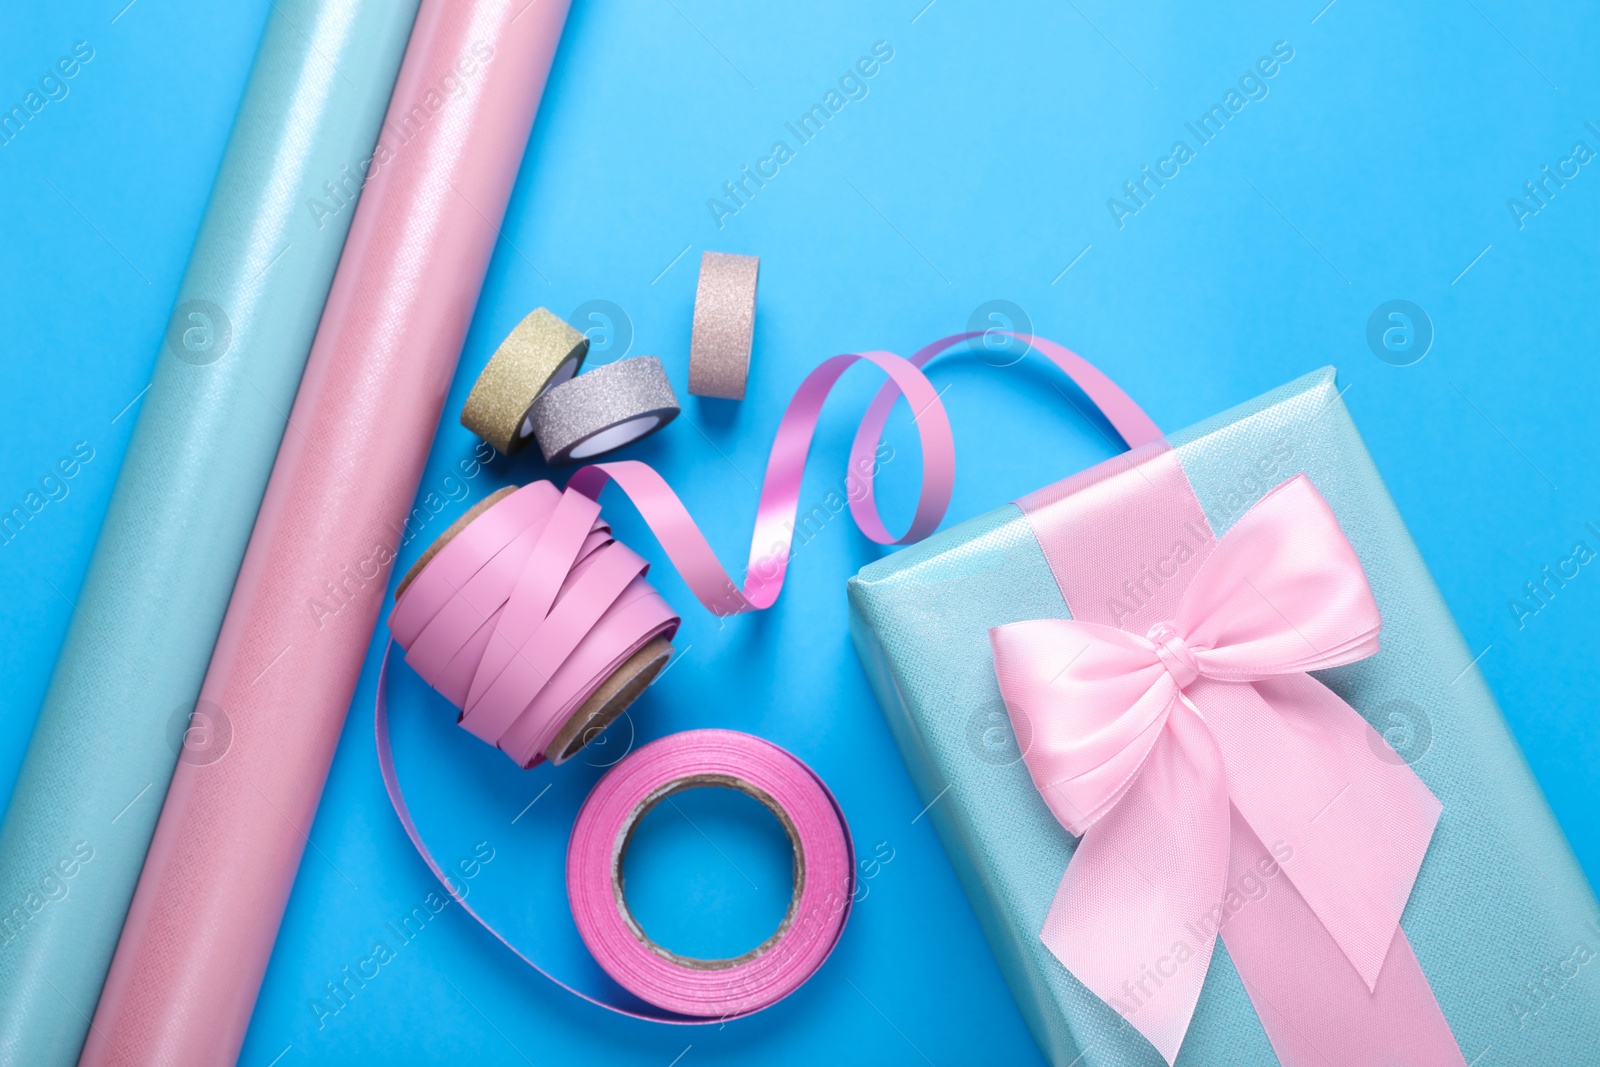 Photo of Rolls of wrapping papers, ribbons and gift box on light blue background, flat lay